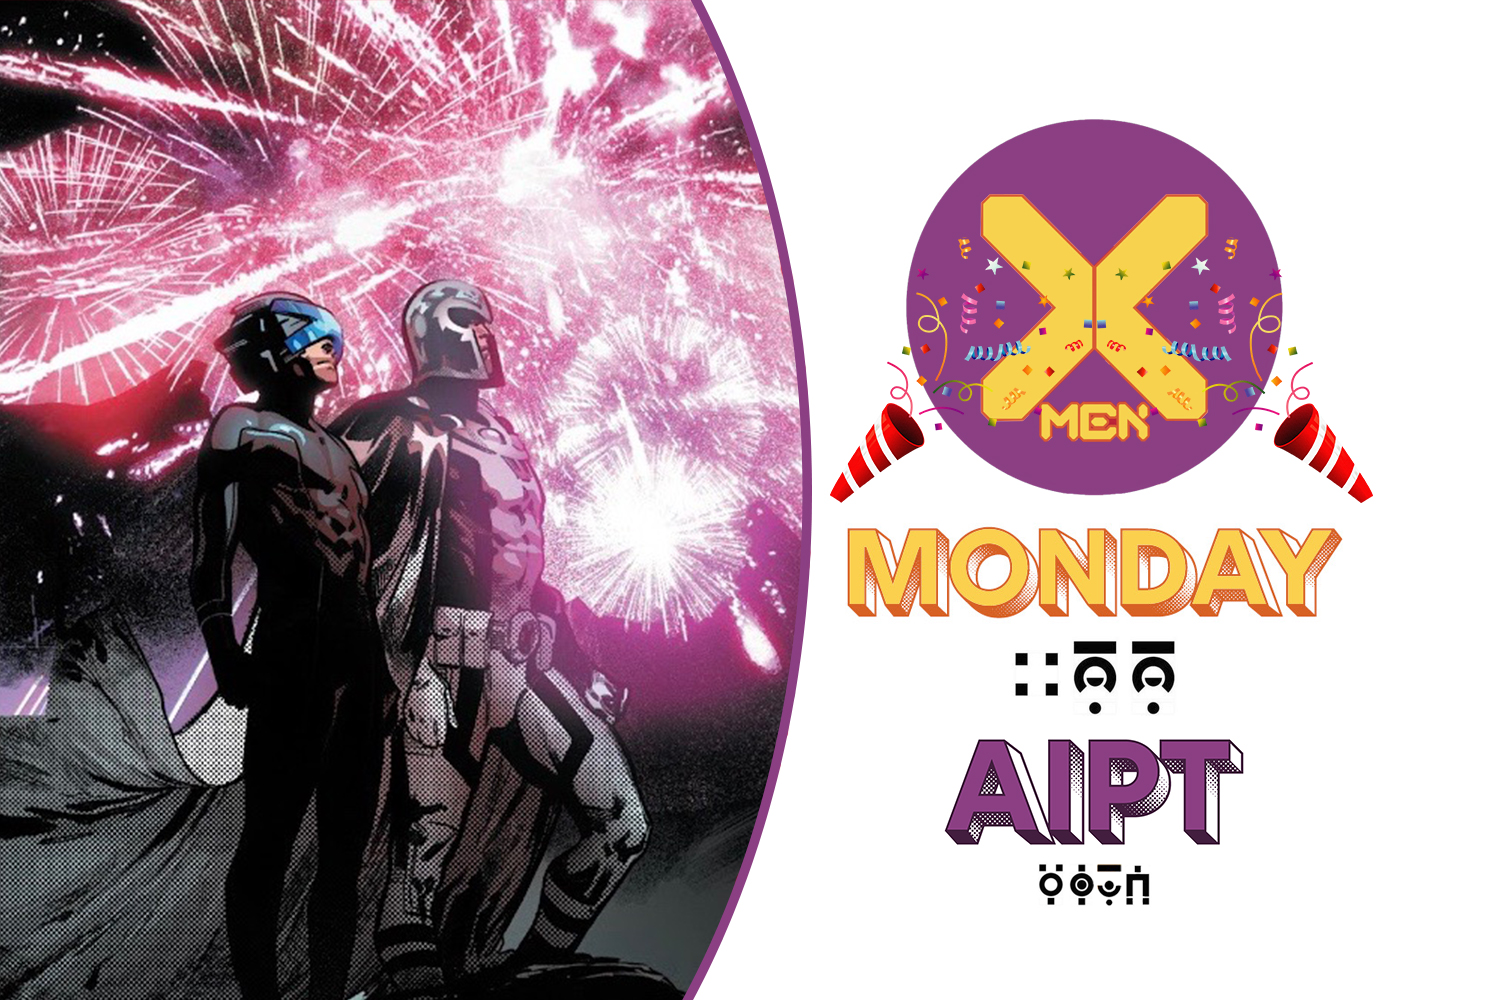 GIANT-SIZE X-Men Monday #41 - Year of X: Jordan D. White reflects on 2019 and teases 2020